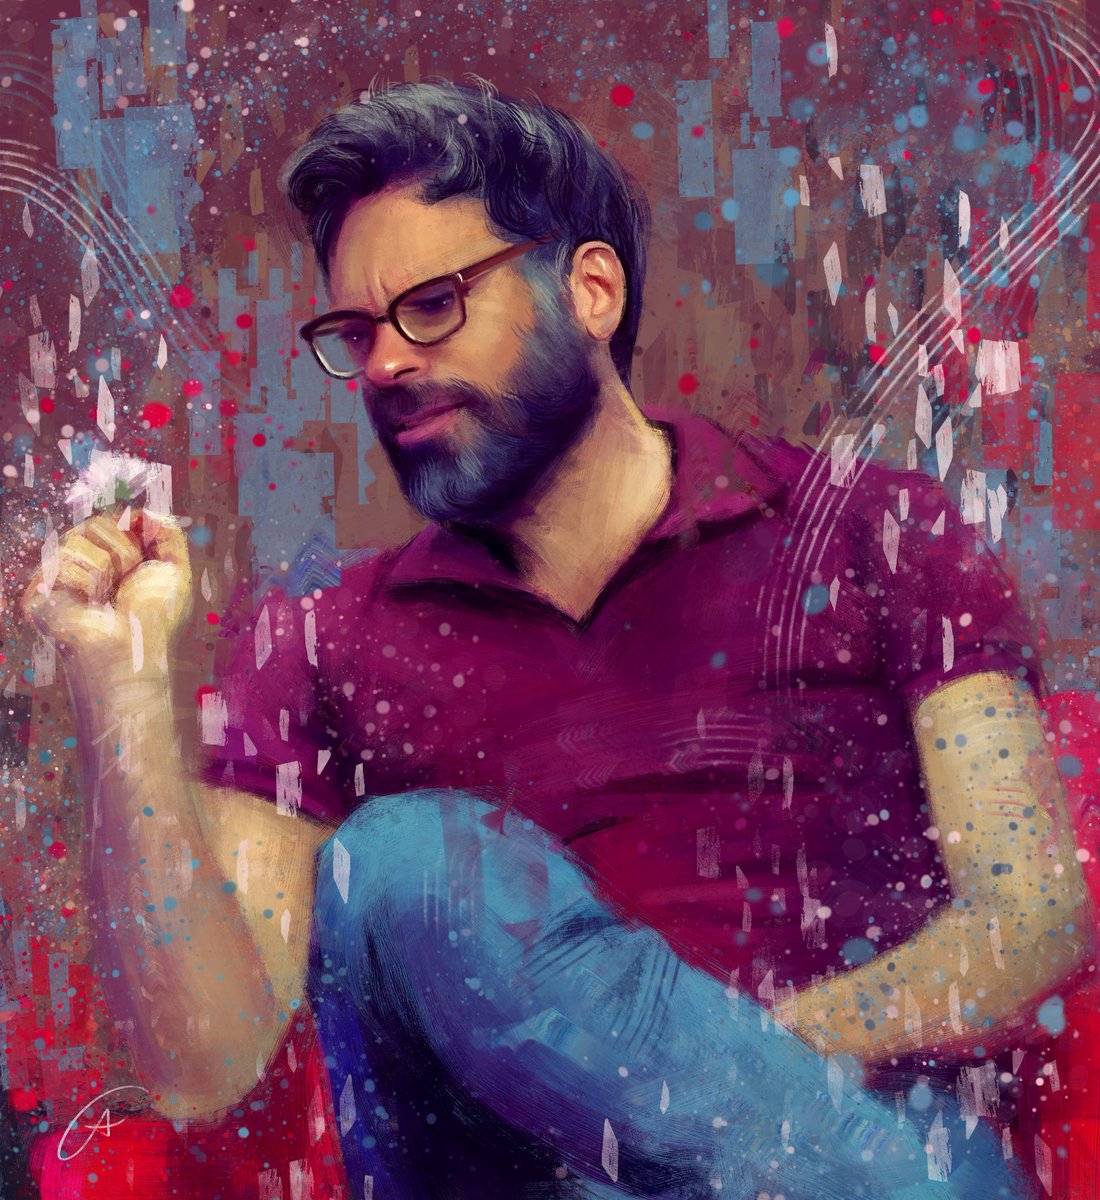 Had the pleasure to work on this Jemaine Clement commission last month 😊 #jemaineclement #artistsontwitter #portrait #Commission #fanart